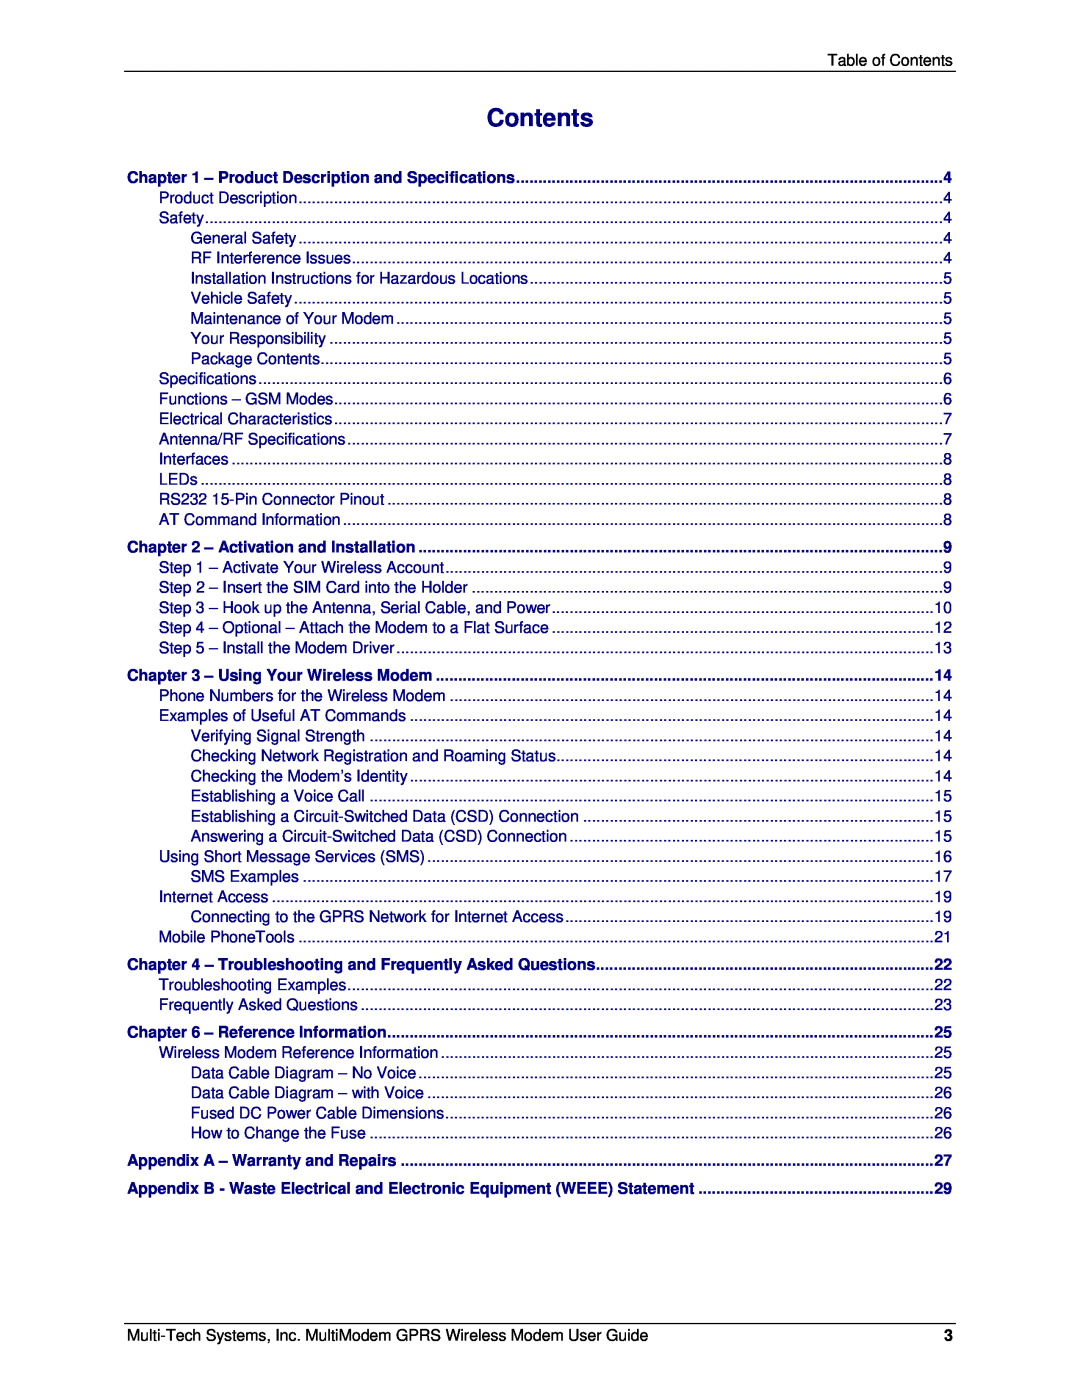 Multi-Tech Systems F2, MTCBA-G-F1 manual Contents 